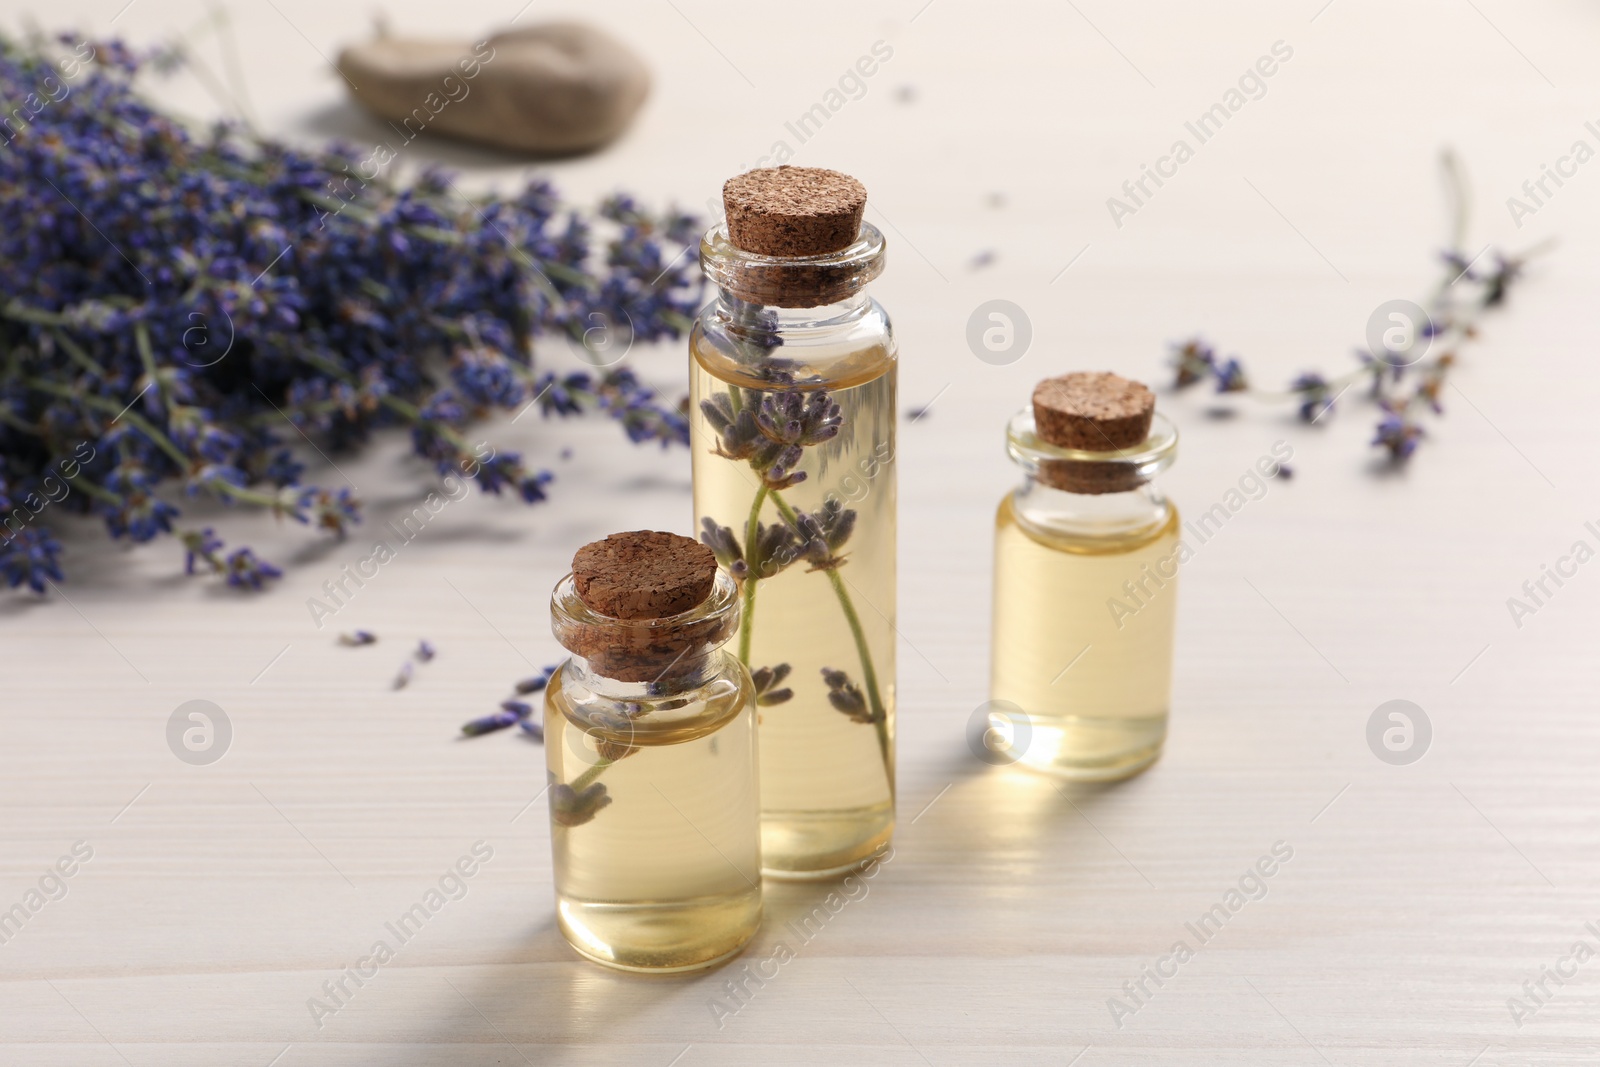 Photo of Essential oil and lavender flowers on white wooden table